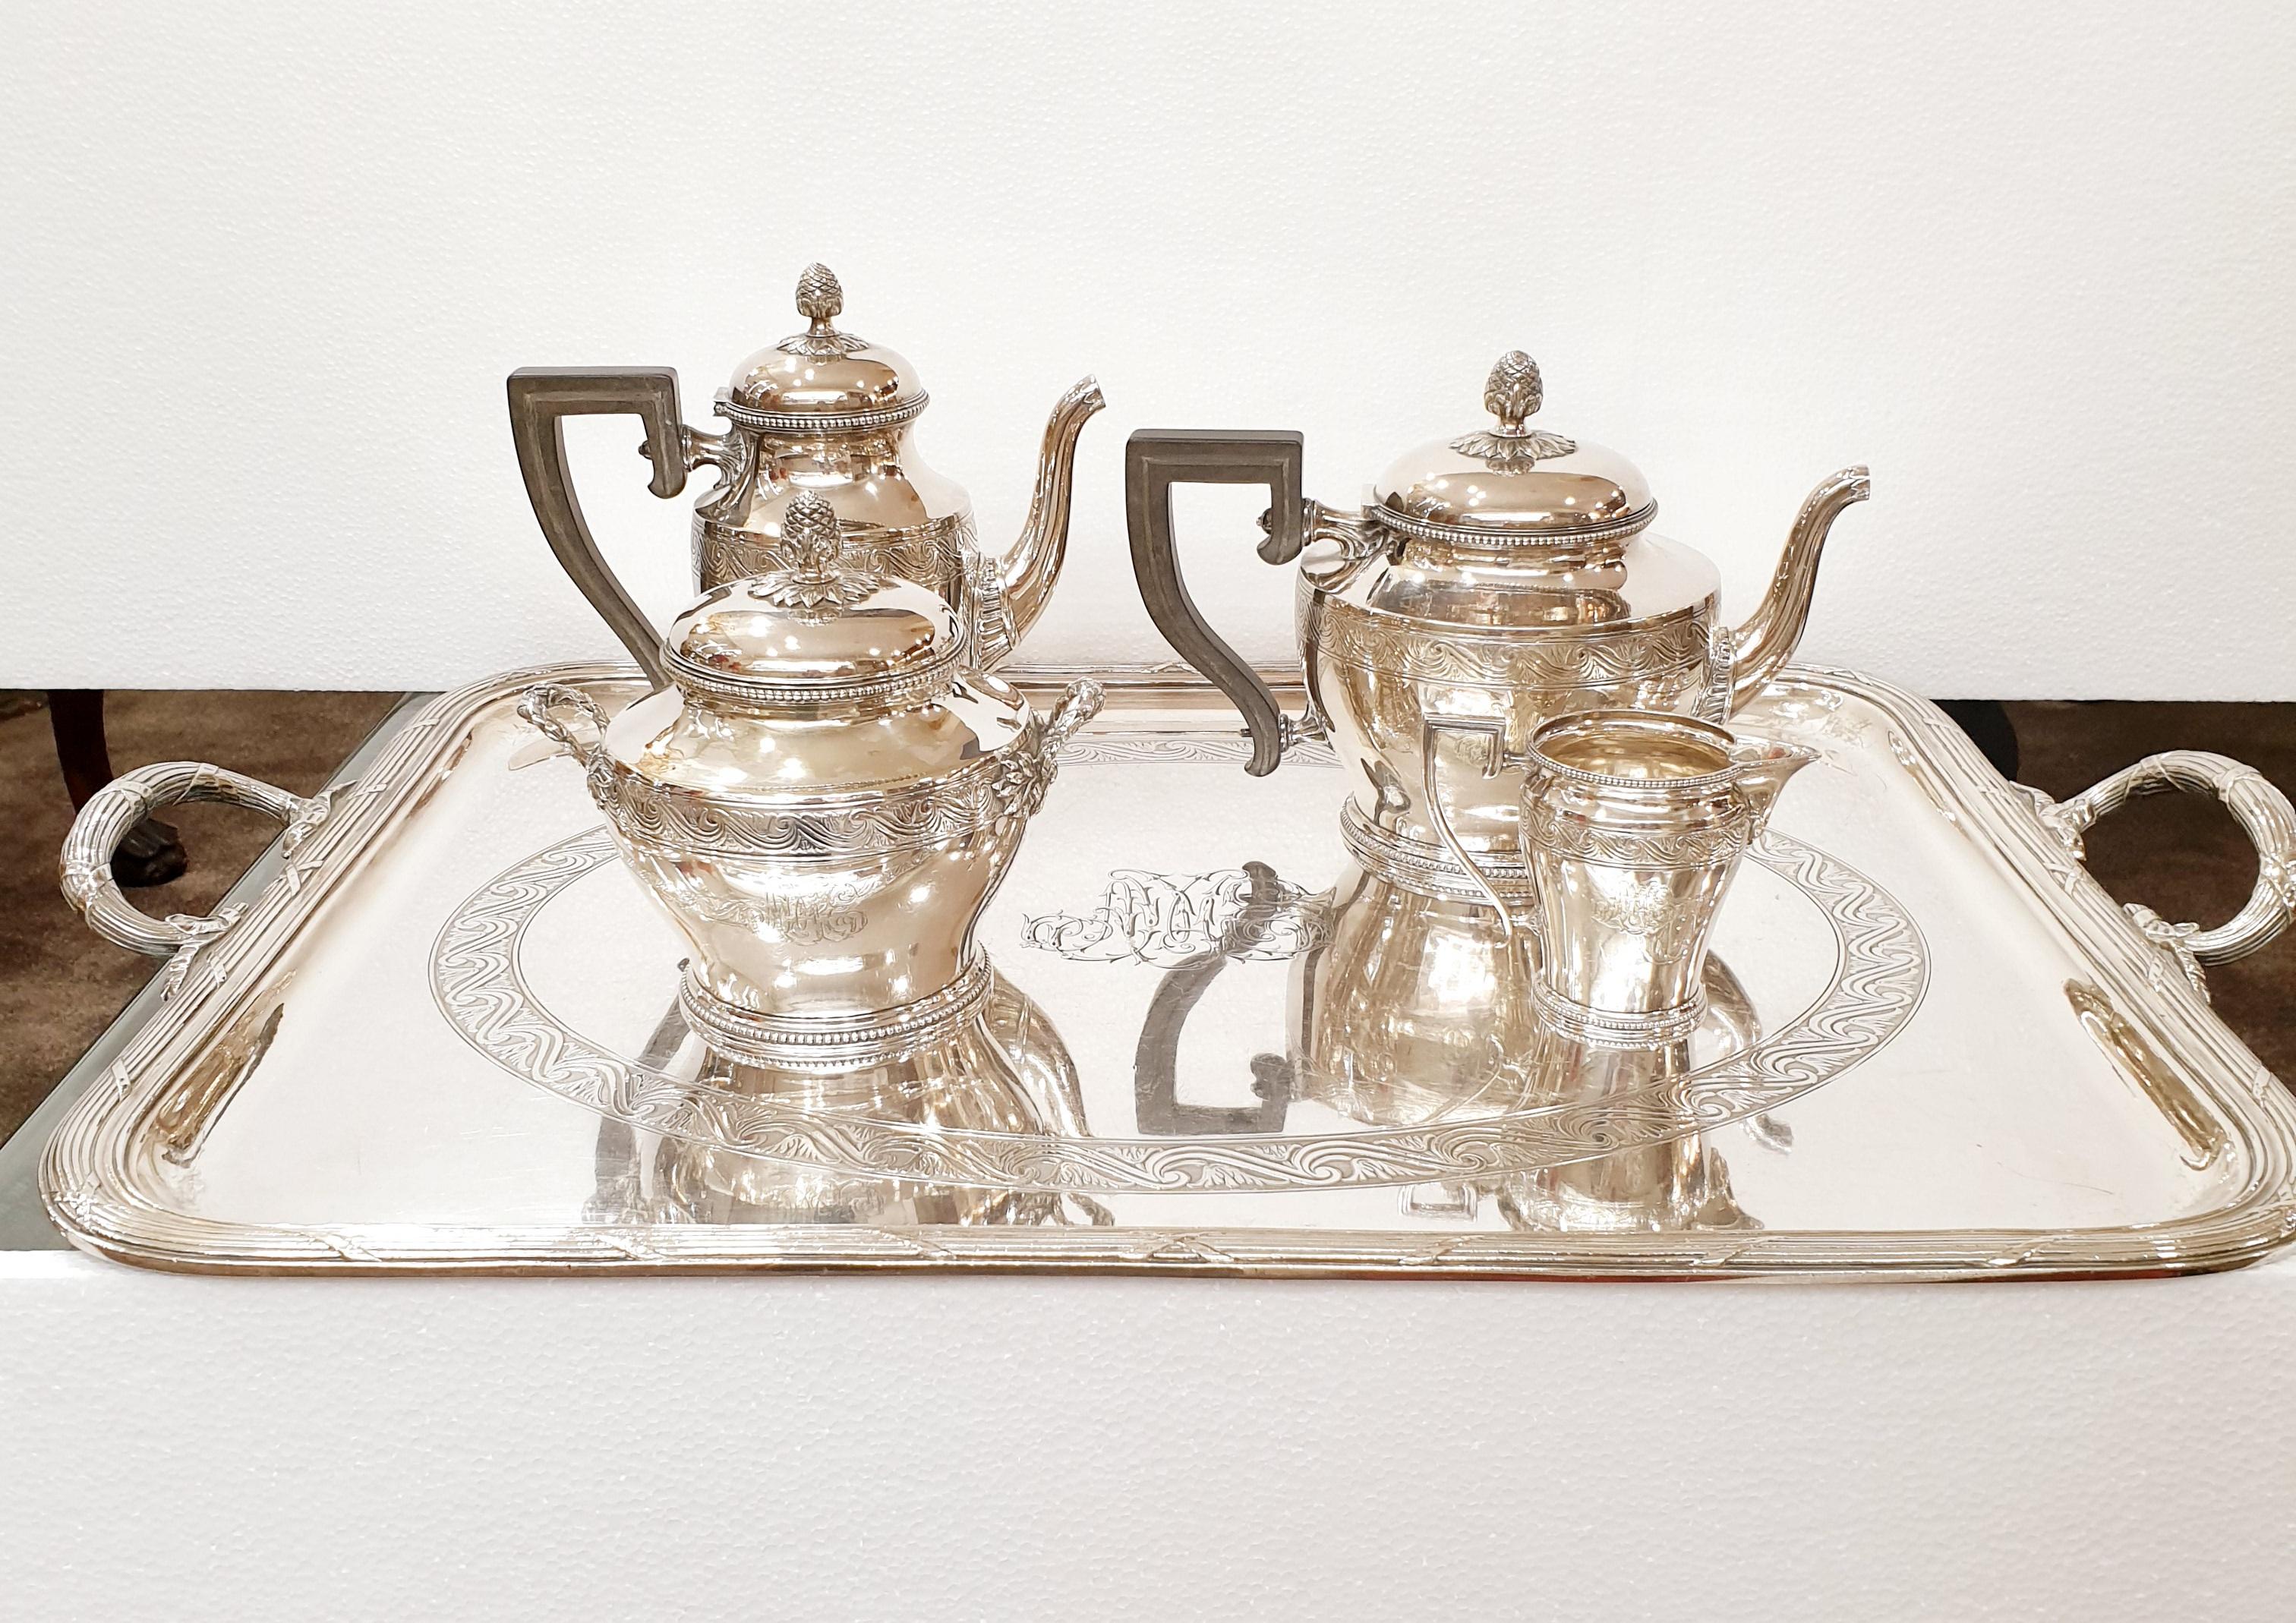 Marvelous Christofle Tea and Coffee Set with Ebony Handles
Set of five silver plated service, consisting of mocha and teapot with ebony handles, cream jug, sugar tray and tray, on the underside punctured company name.  With beautiful classic